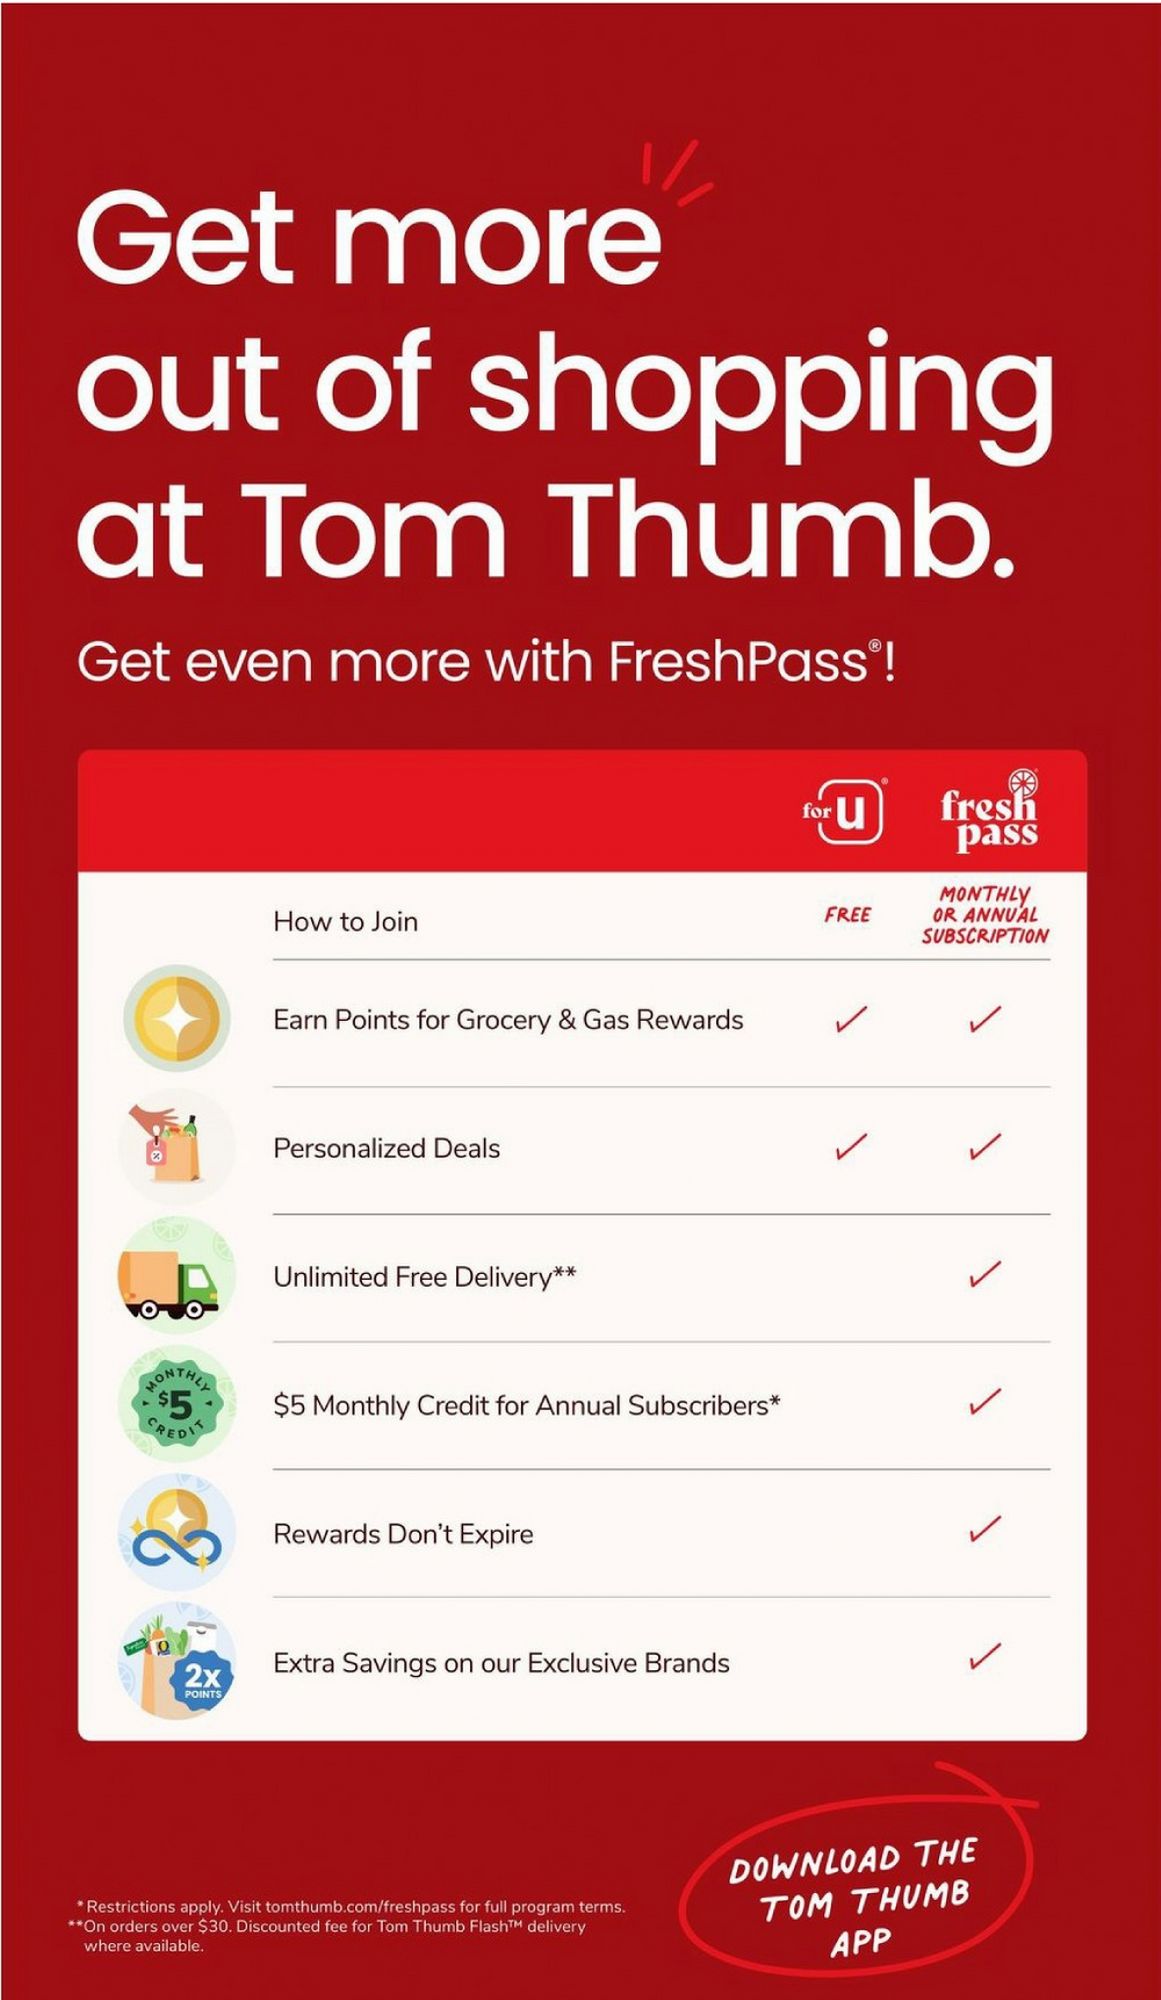 Tom Thumb Christmas July 2024 Weekly Sales, Deals, Discounts and Digital Coupons.